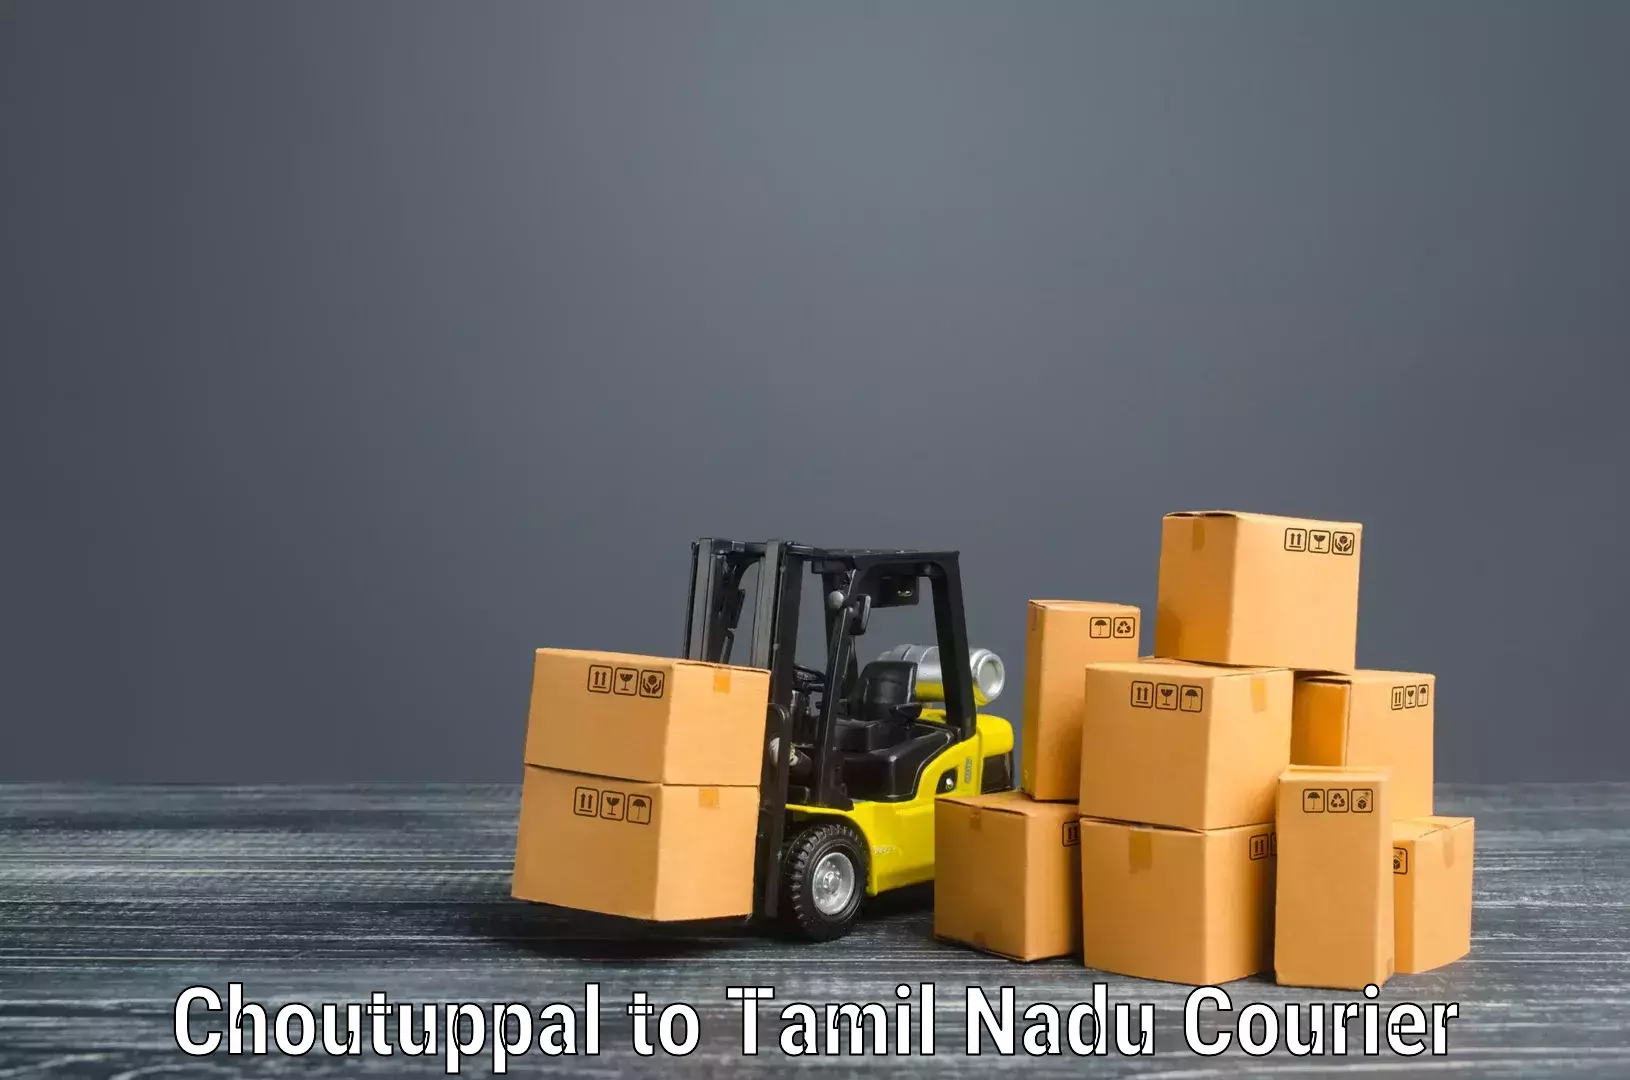 Comprehensive relocation services Choutuppal to Ambur